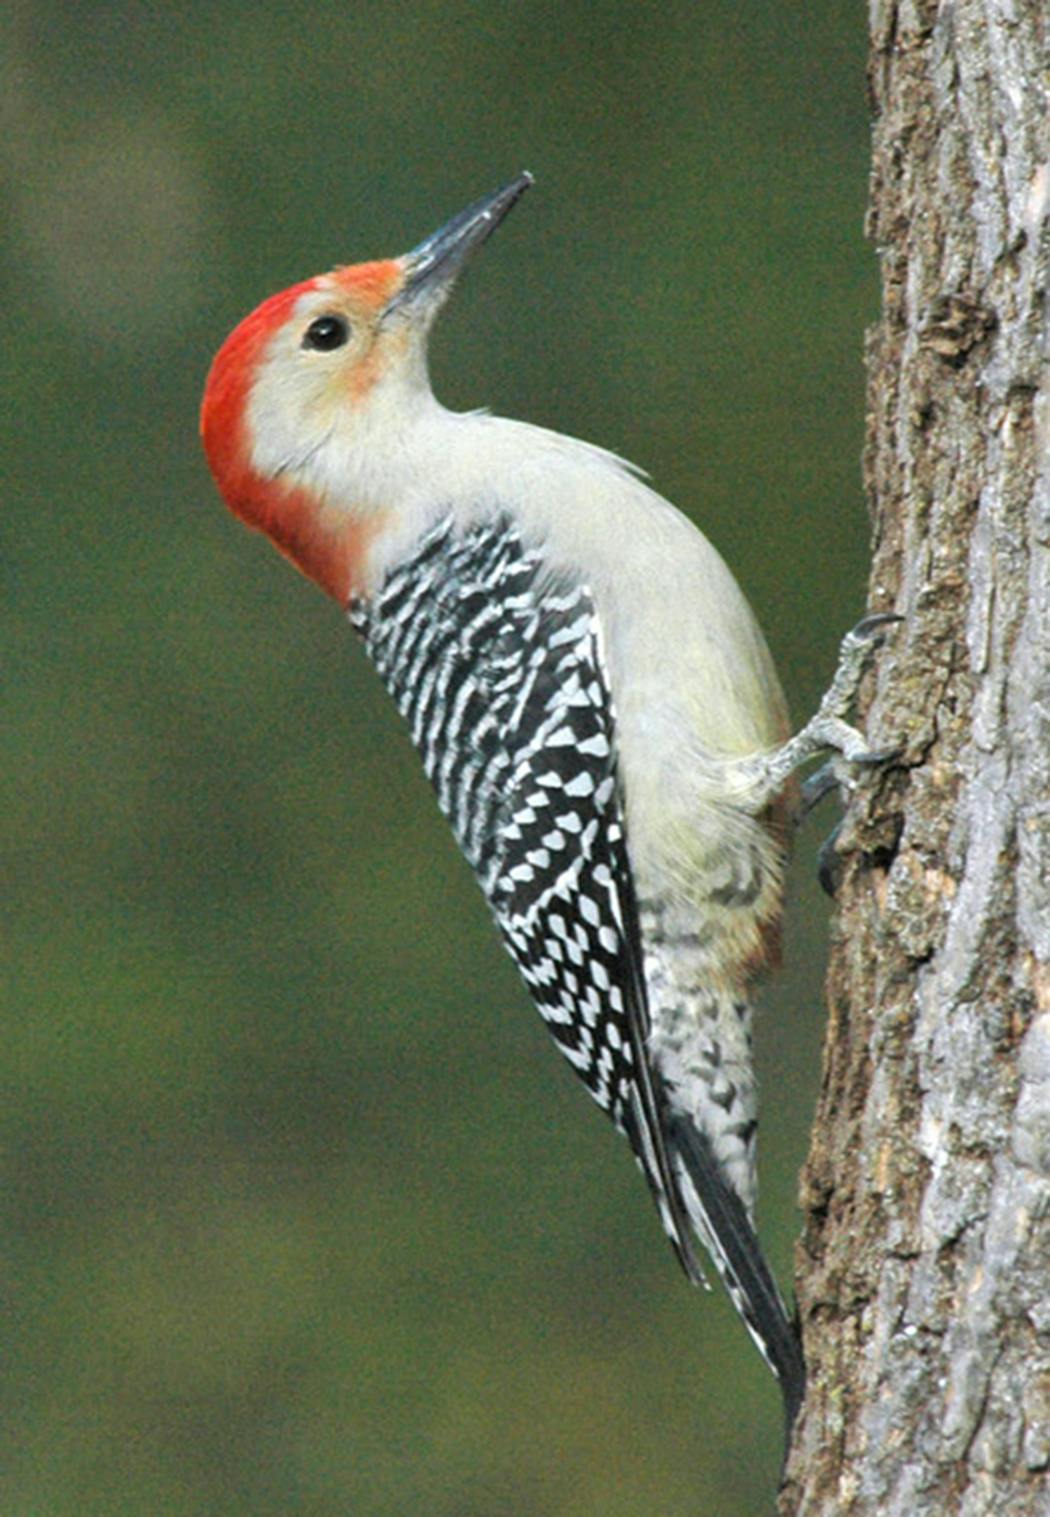 A typical red-bellied woodpecker with little to no red on its belly.